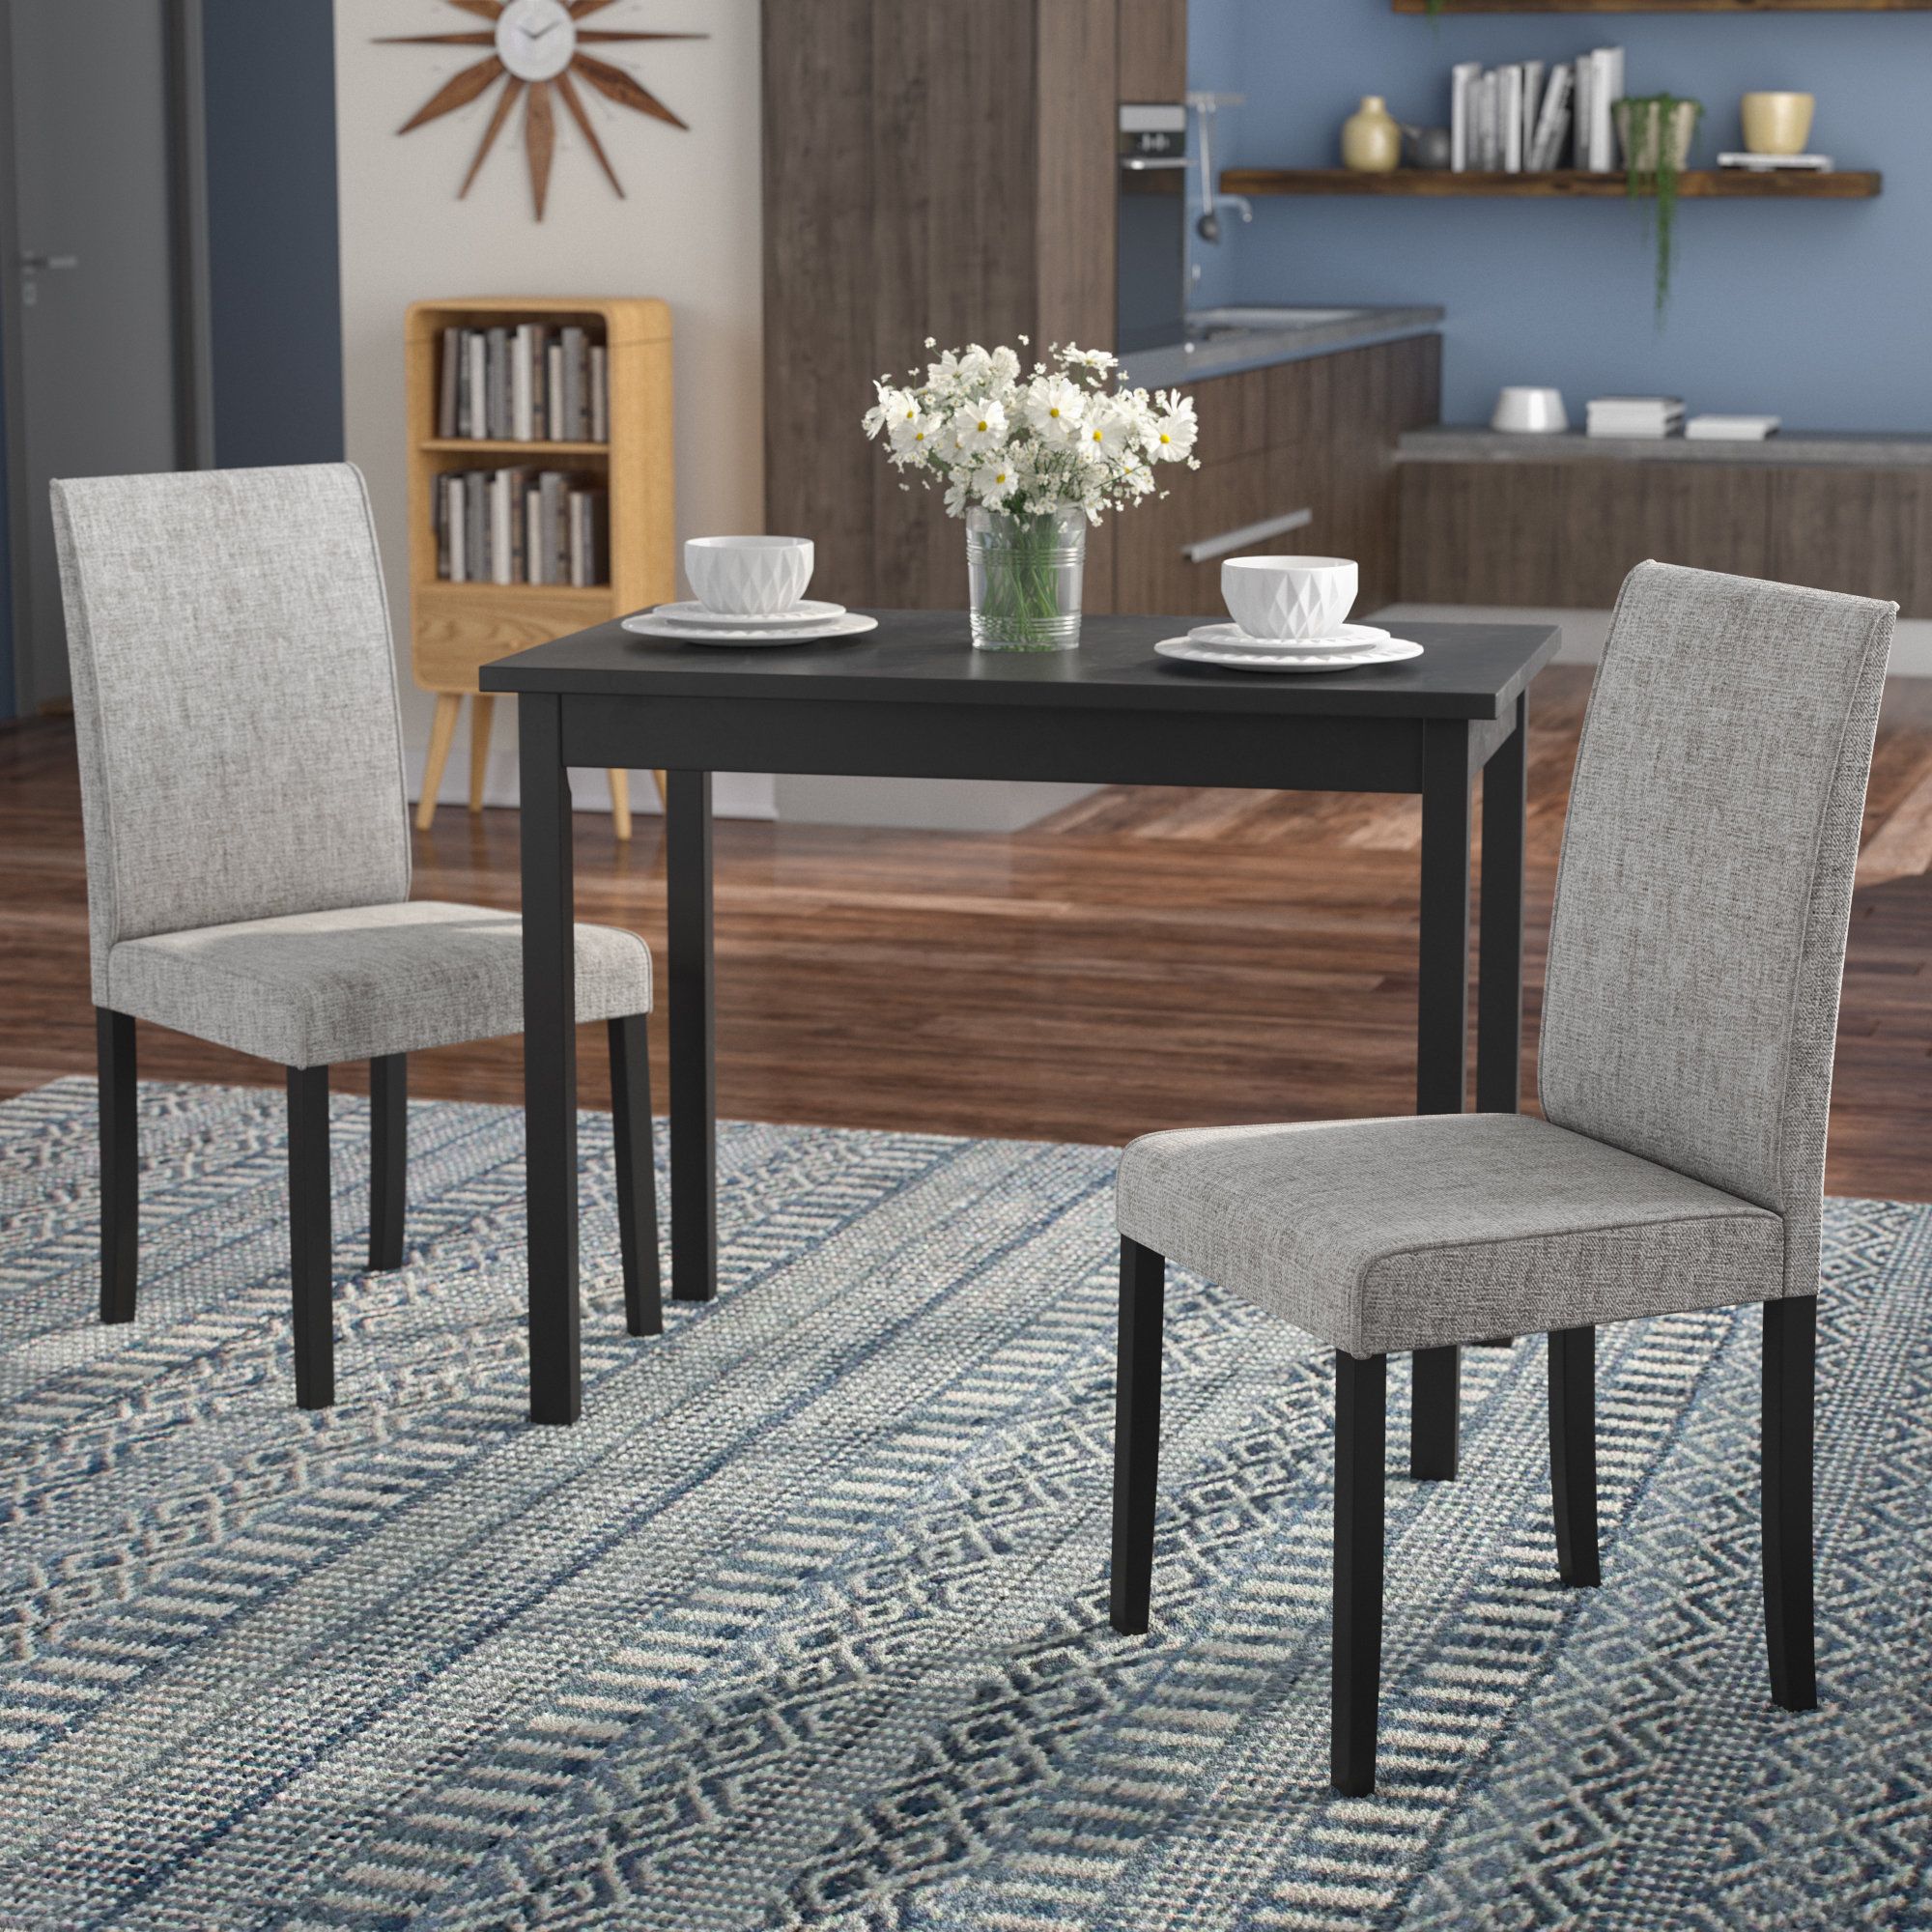 Darvell 3 Piece Dining Set Regarding Most Current 3 Piece Dining Sets (Photo 35471 of 35622)